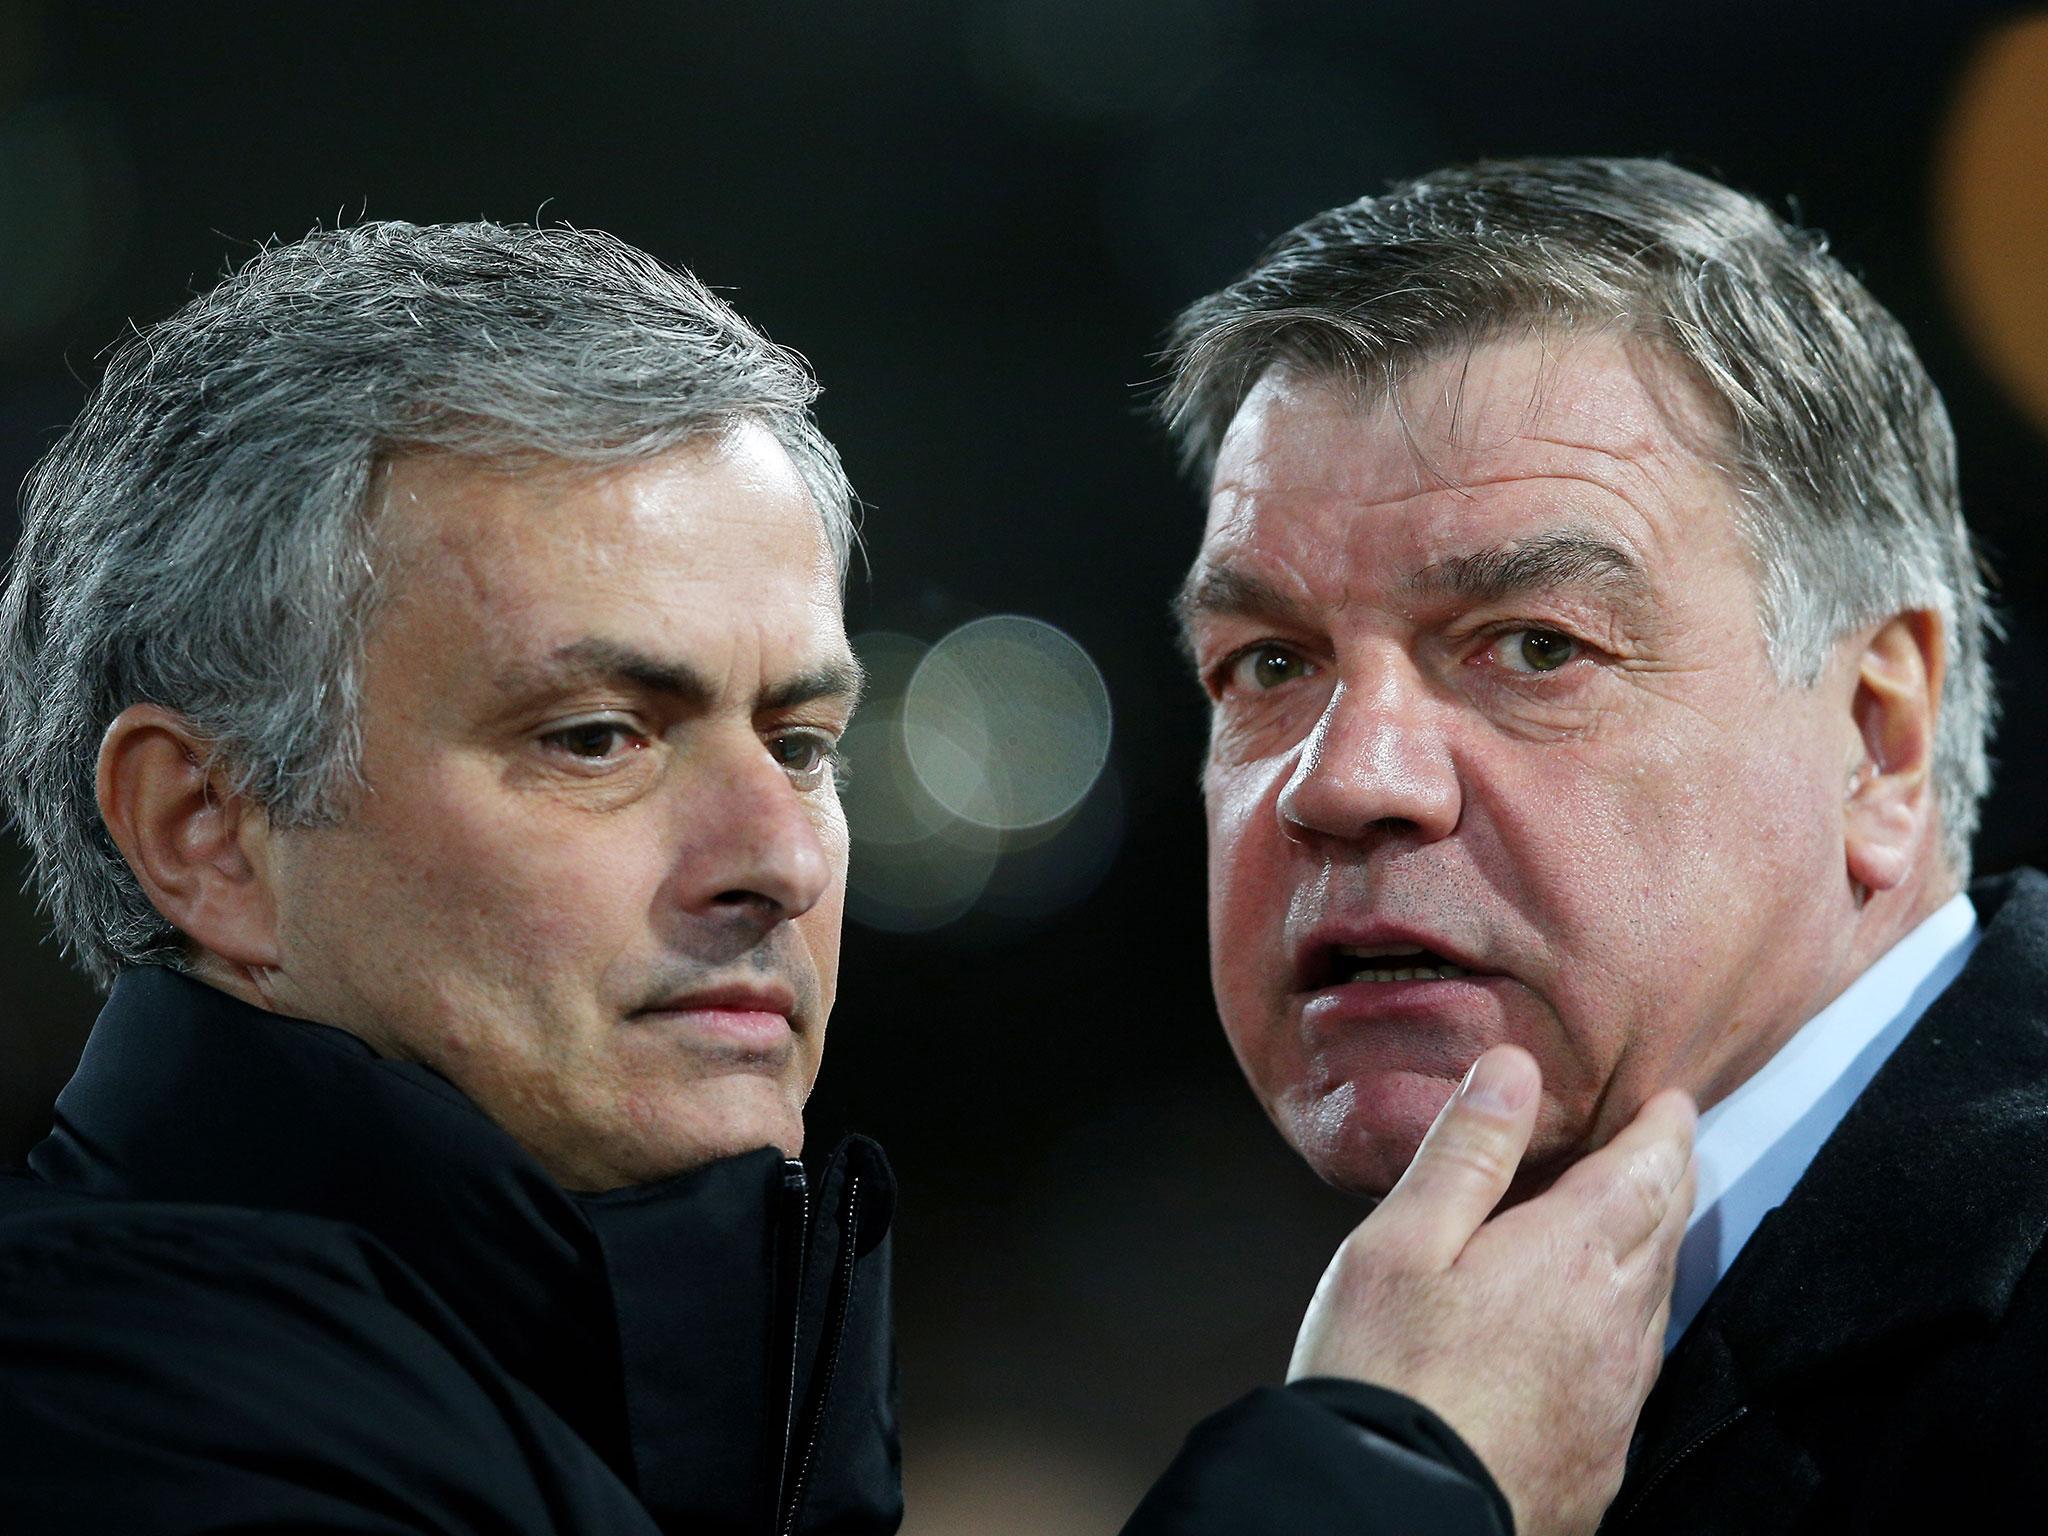 Sam Allardyce would've been happy to move the game to help United's European chances